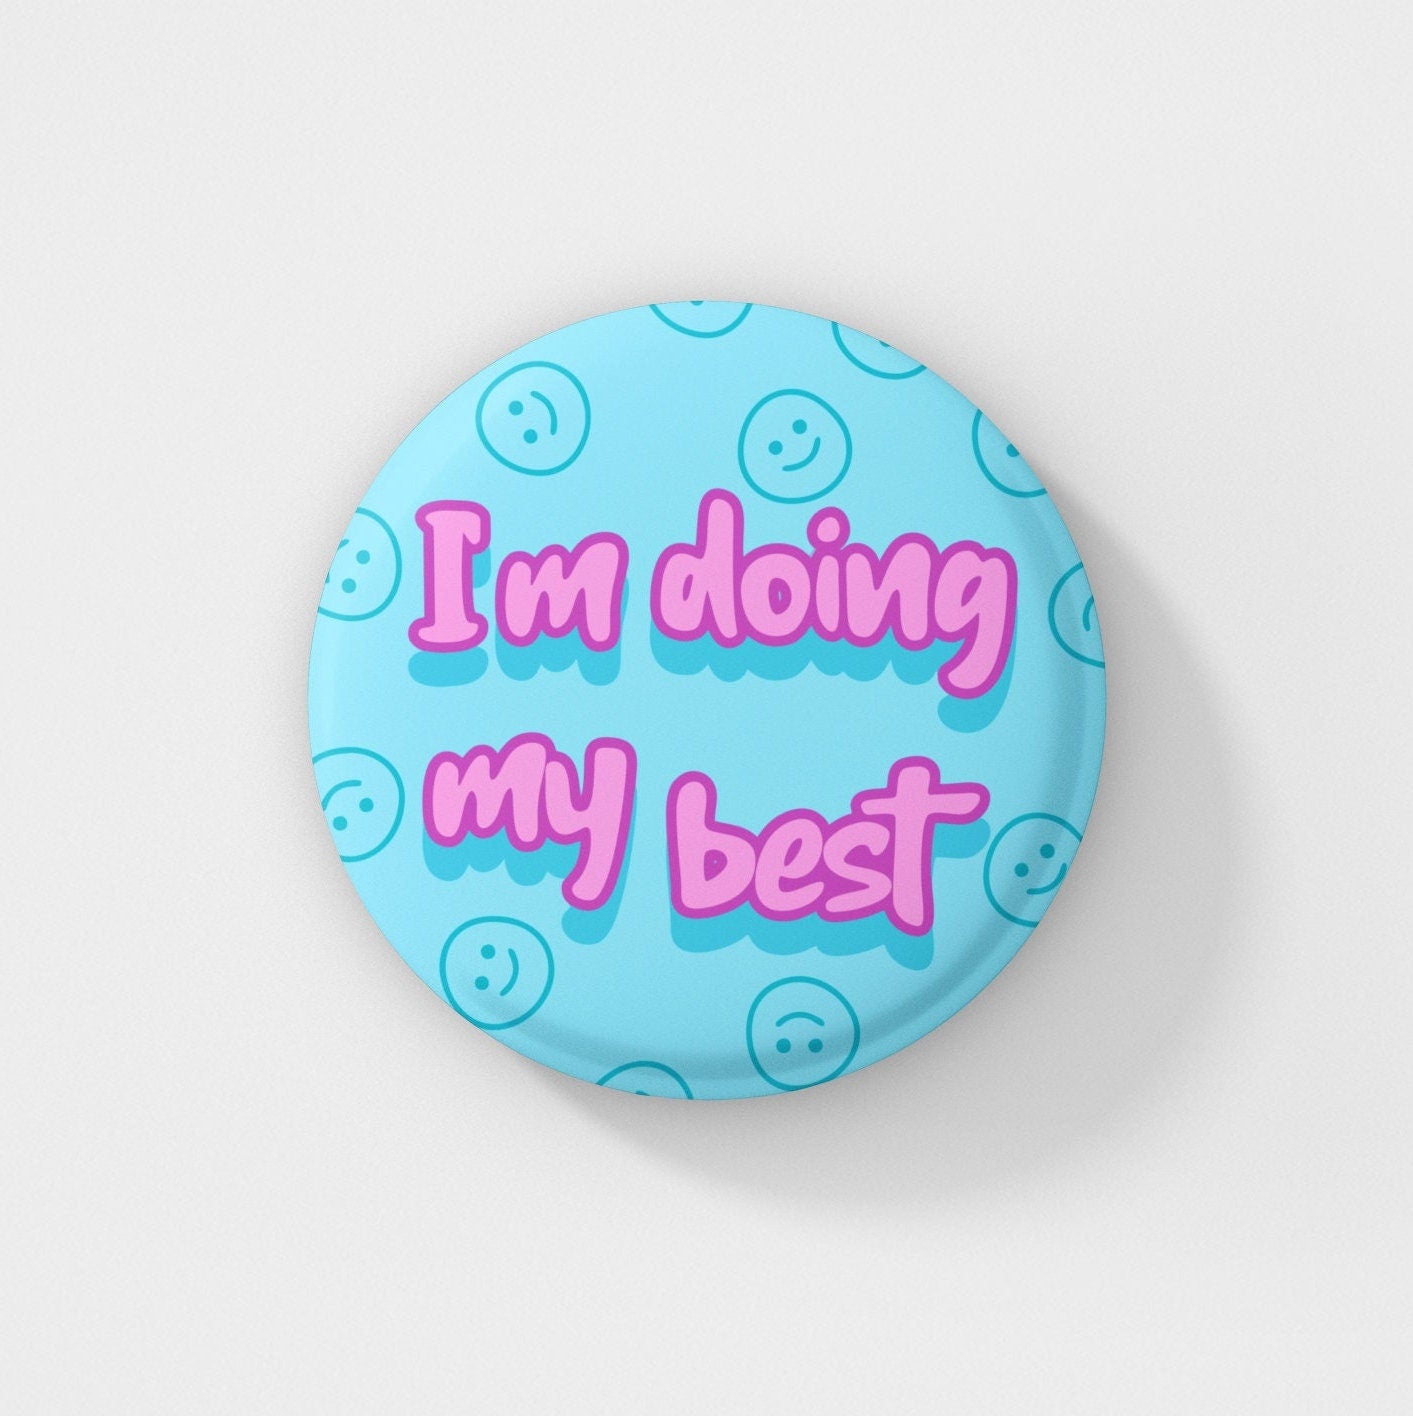 I'm Doing My Best Pin Badge | Mental Health - Depression - Self Love - Unique Gifts - Friend Gifts